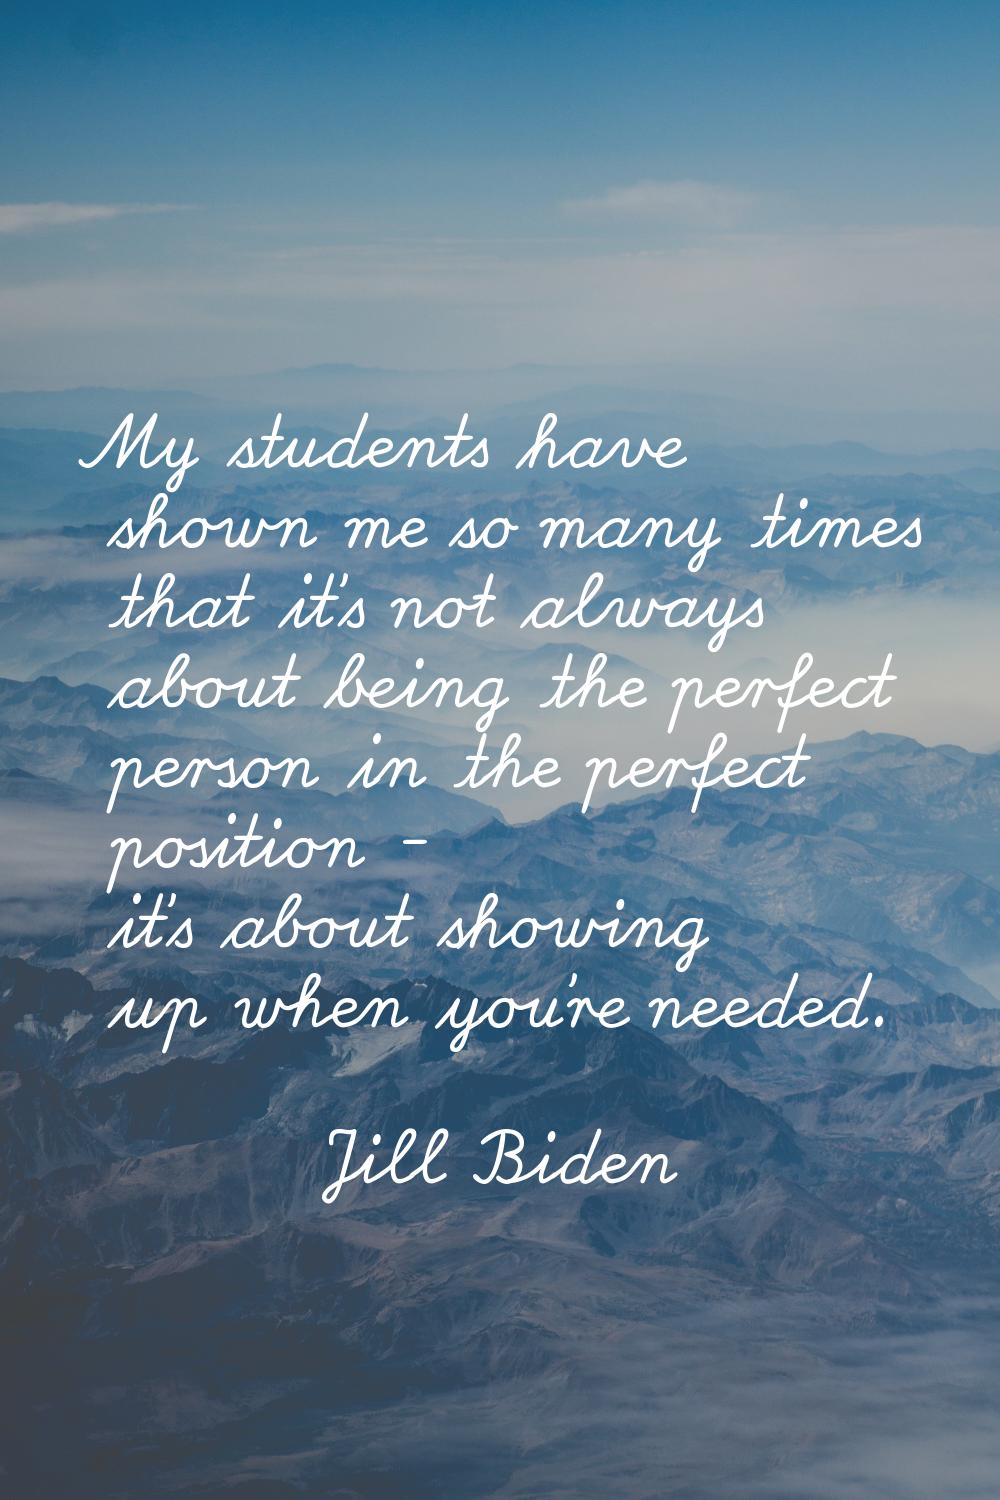 My students have shown me so many times that it's not always about being the perfect person in the 